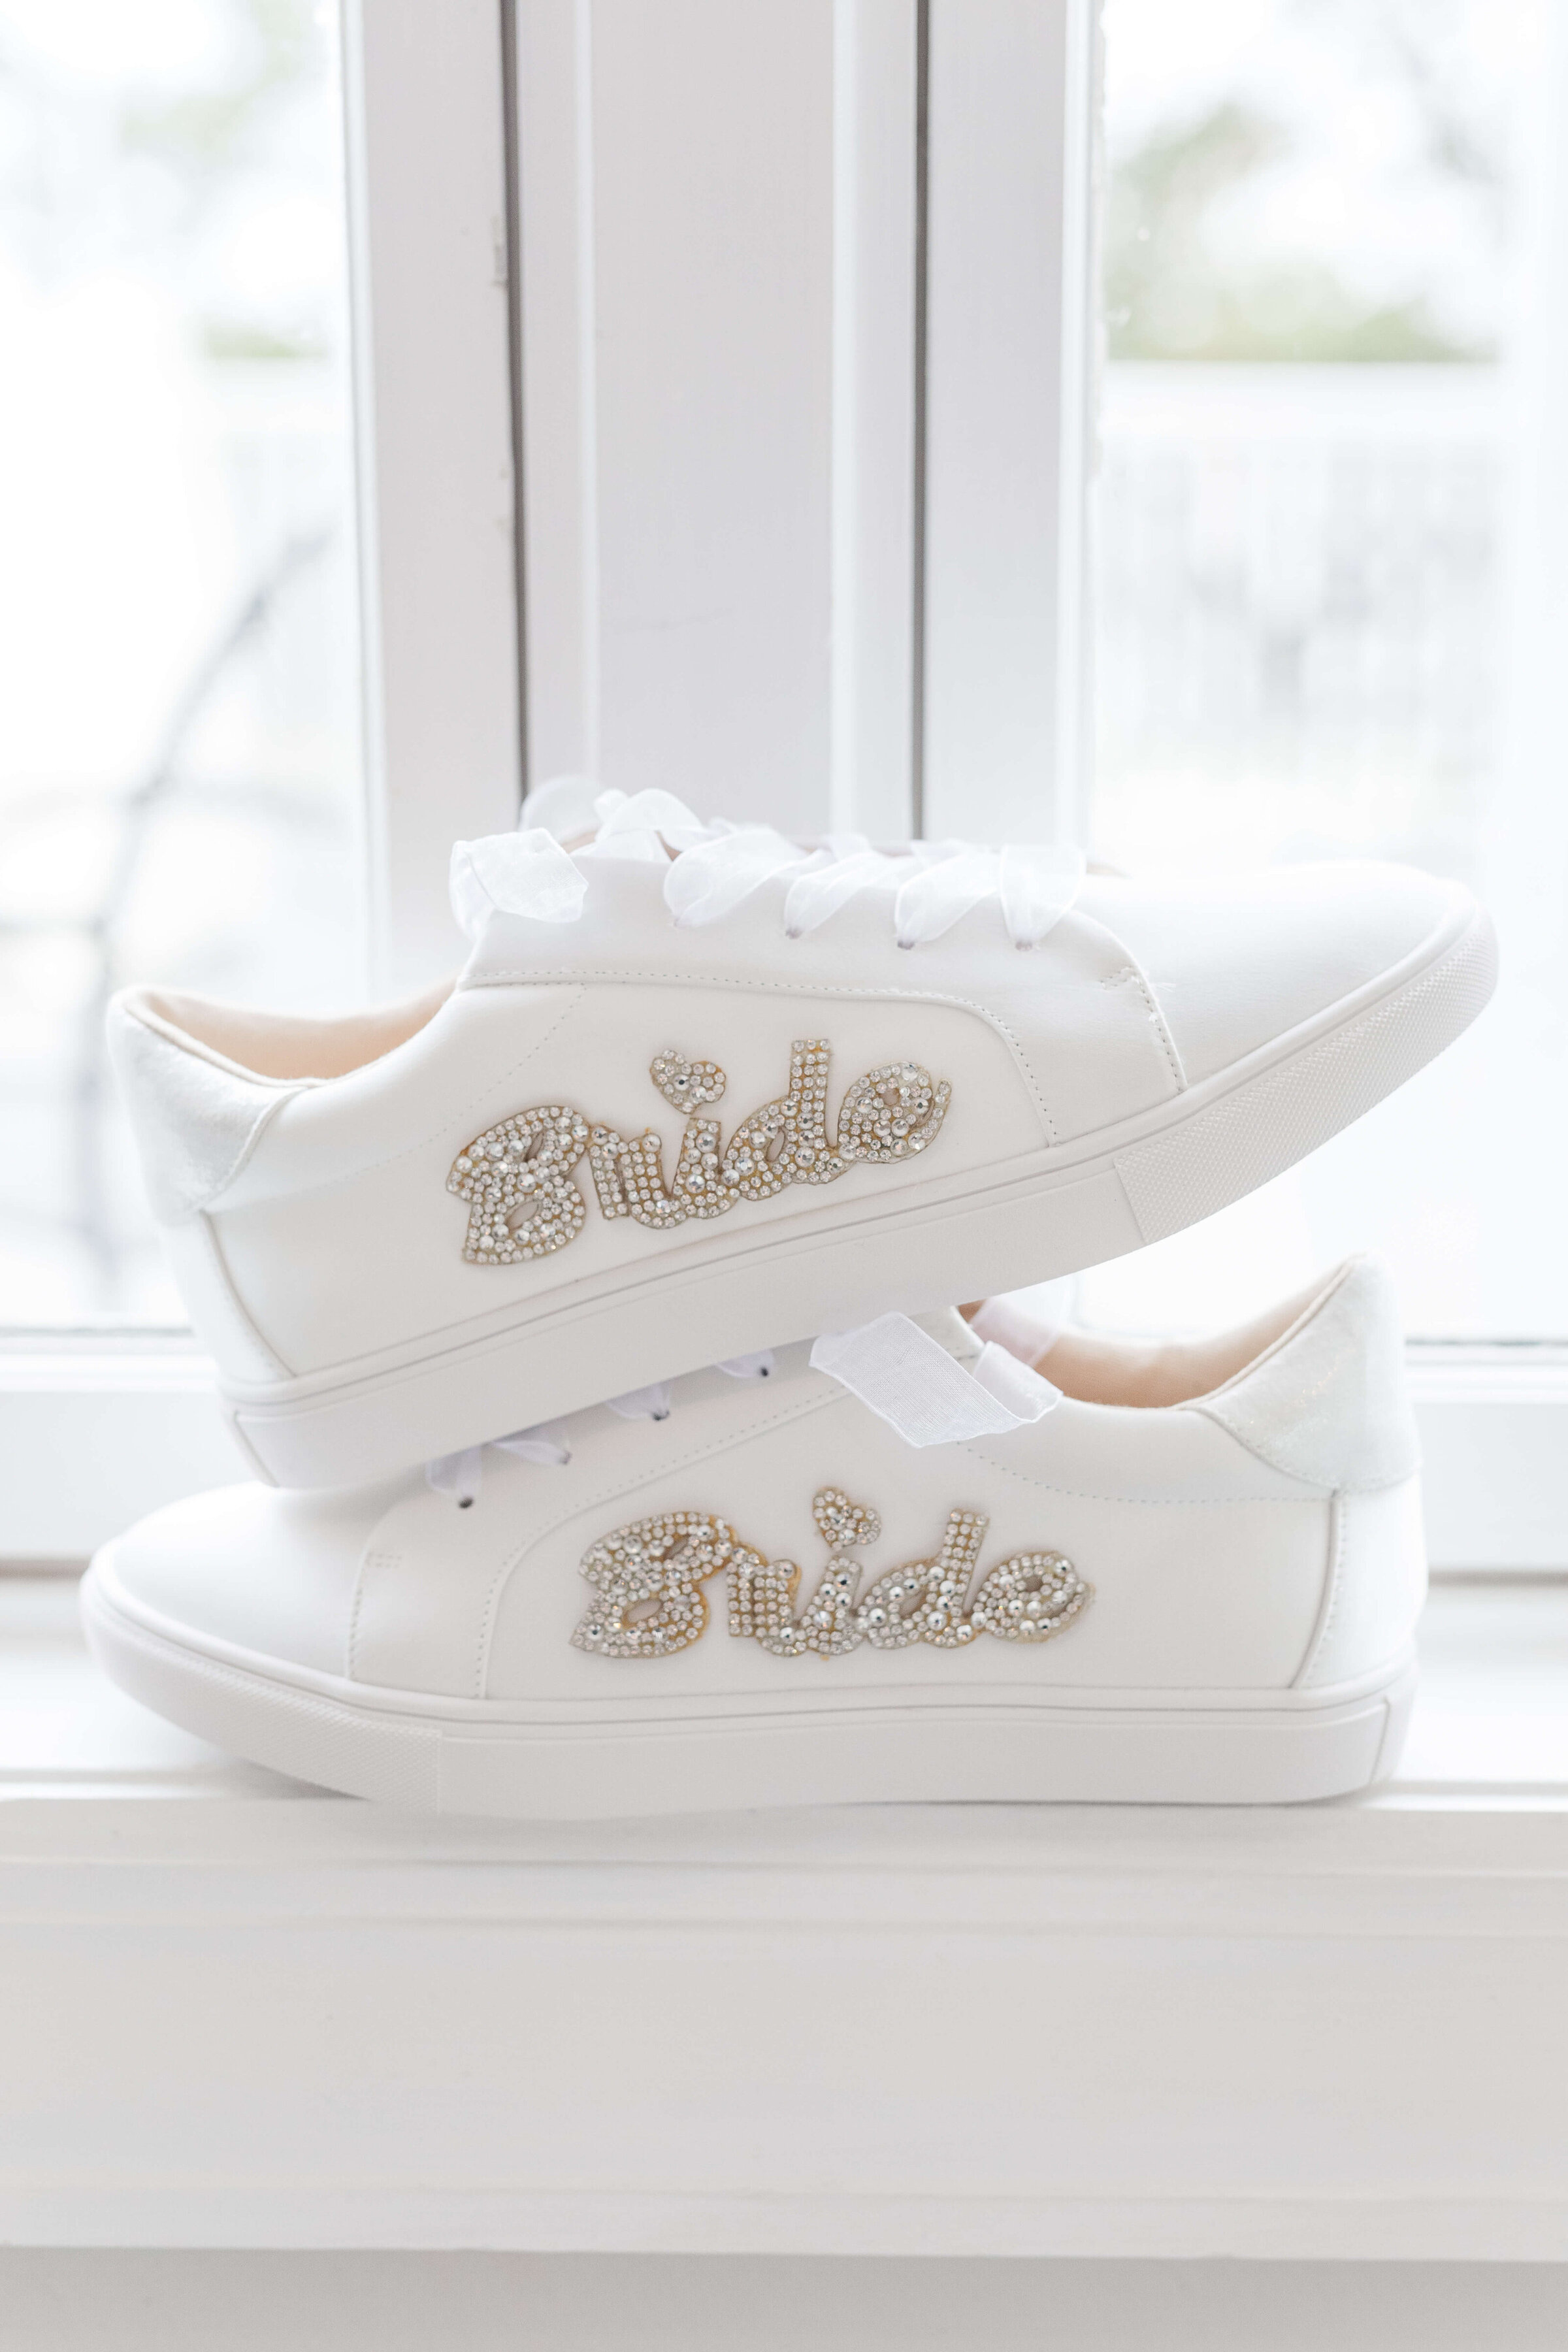 A pair of sneakers in a window that say Bride on the side.